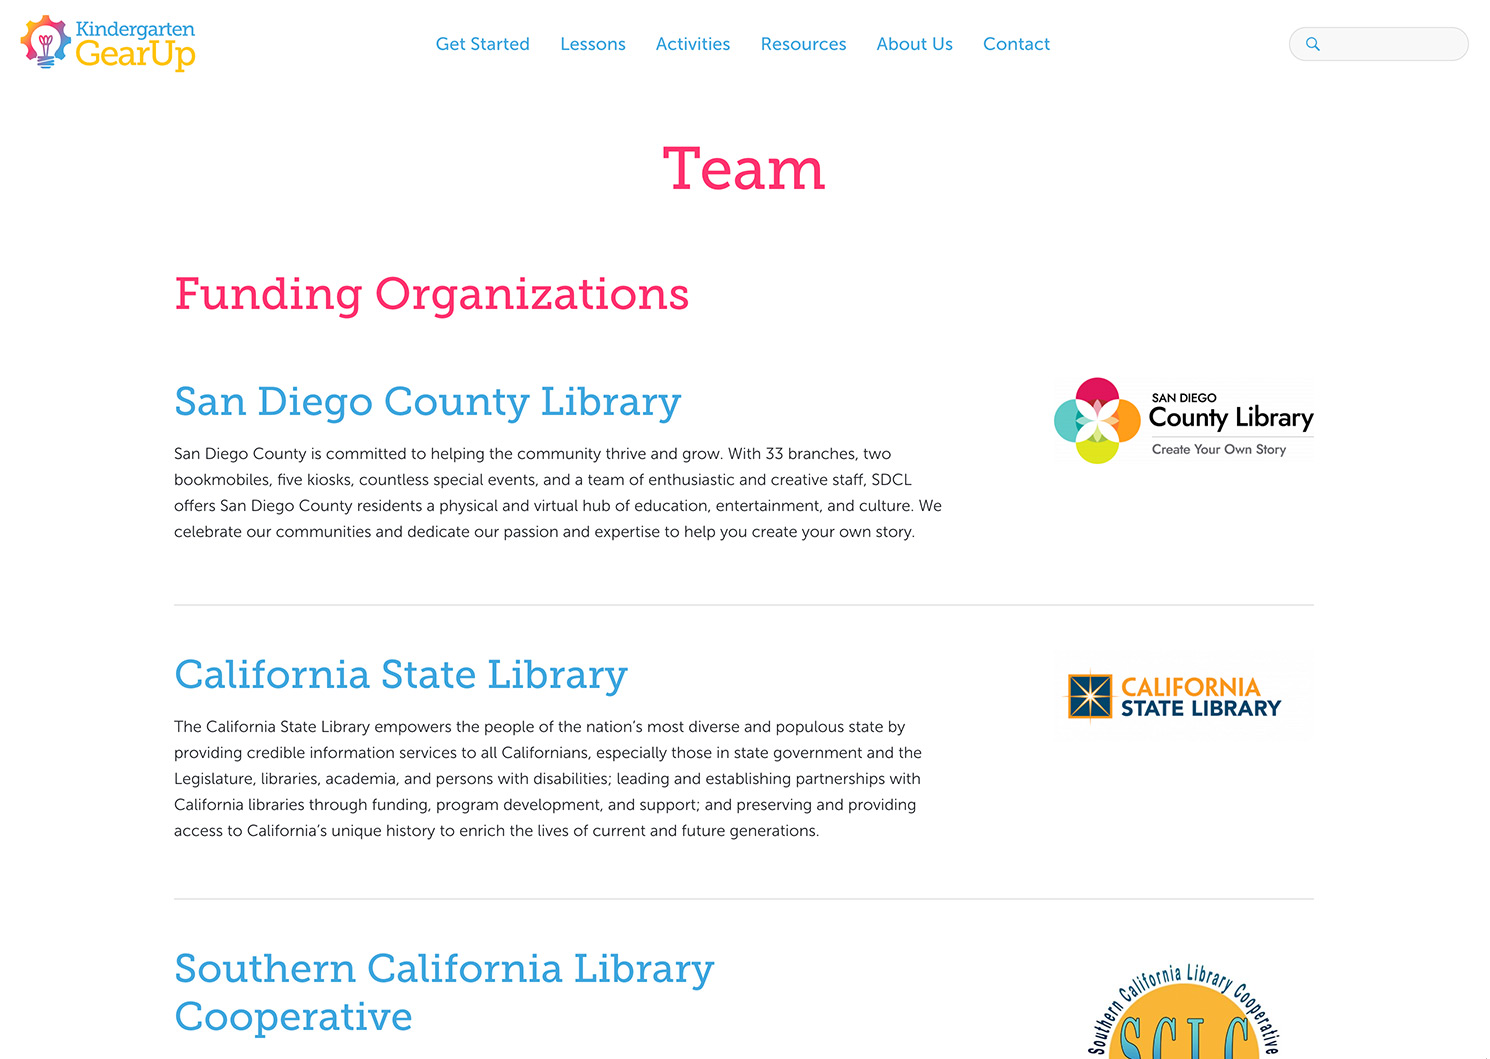 The "Team" page on the Kindergarten Gear Up website featuring a list of funding organizations